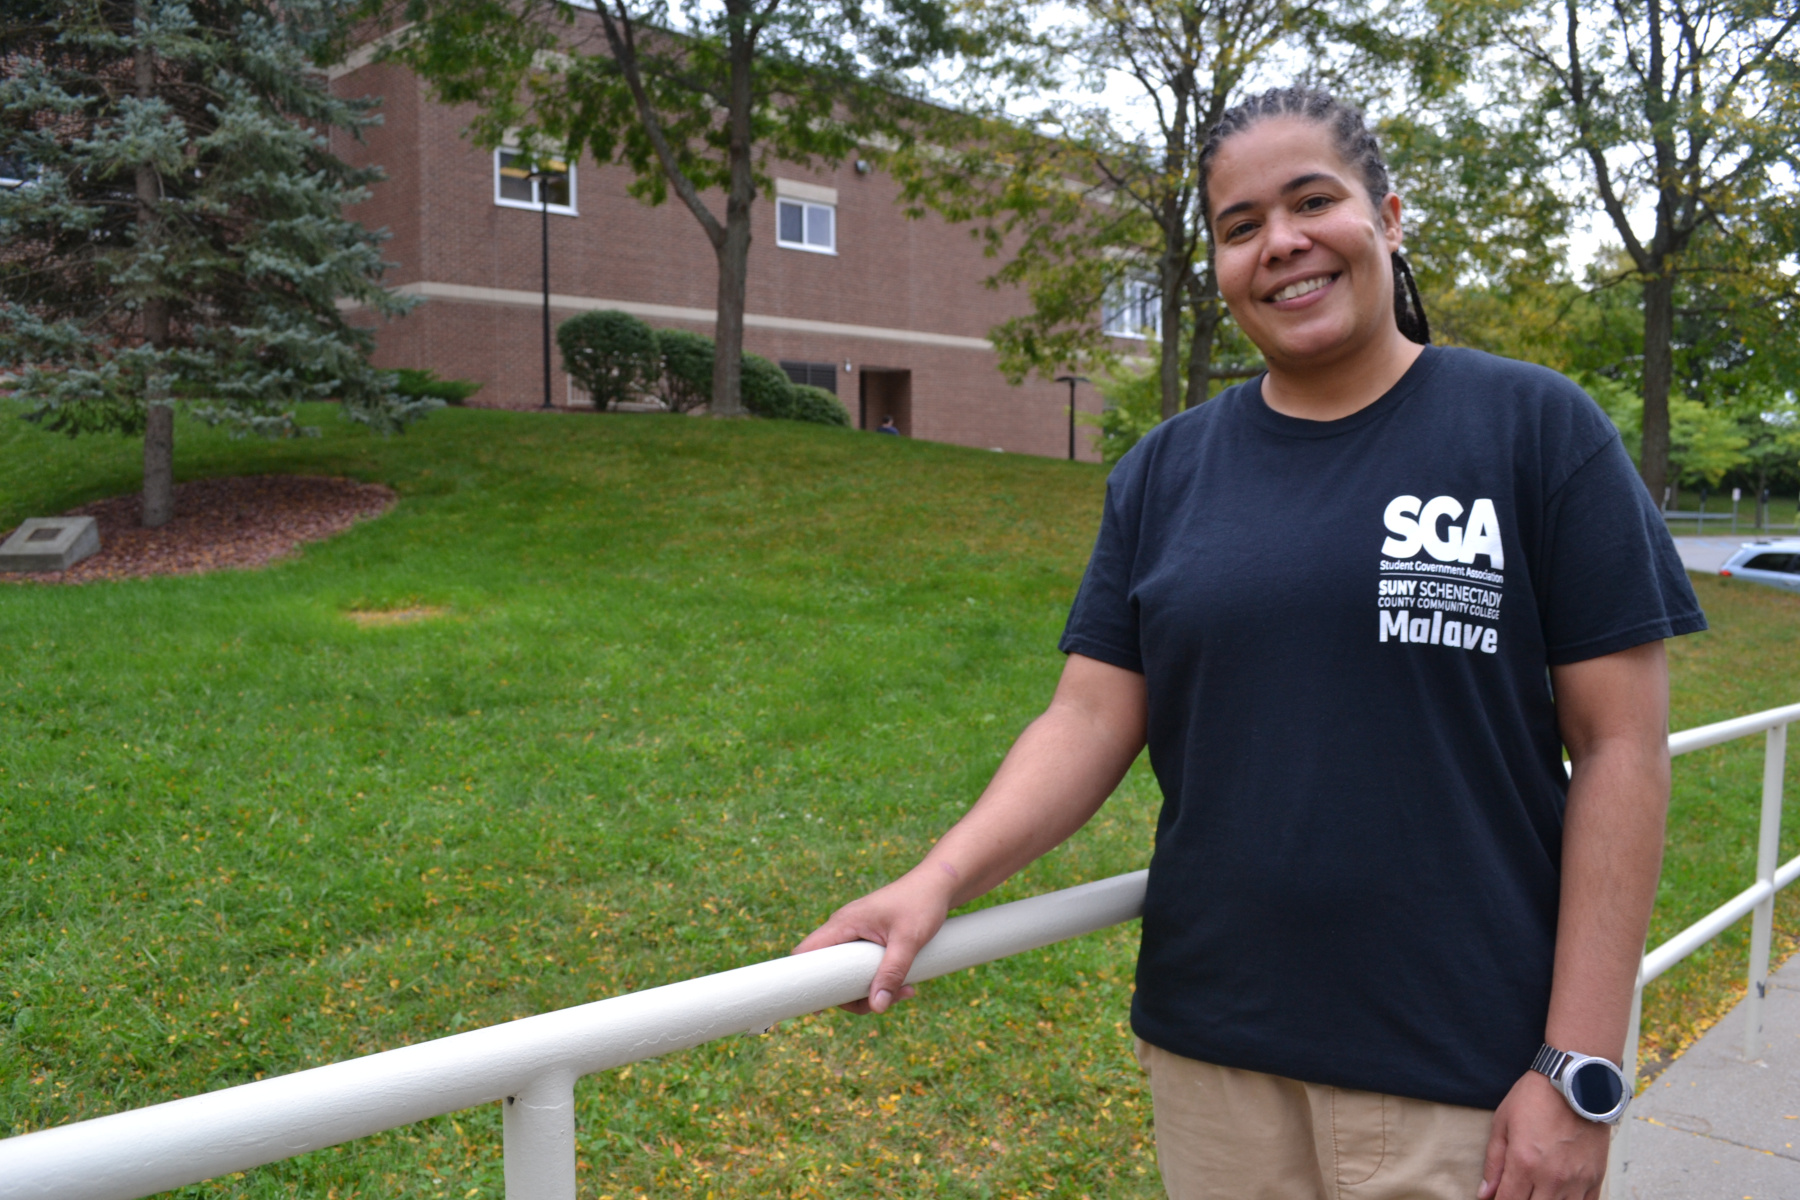 Jennifer Malave standing outside in the quad with SGA tshirt on